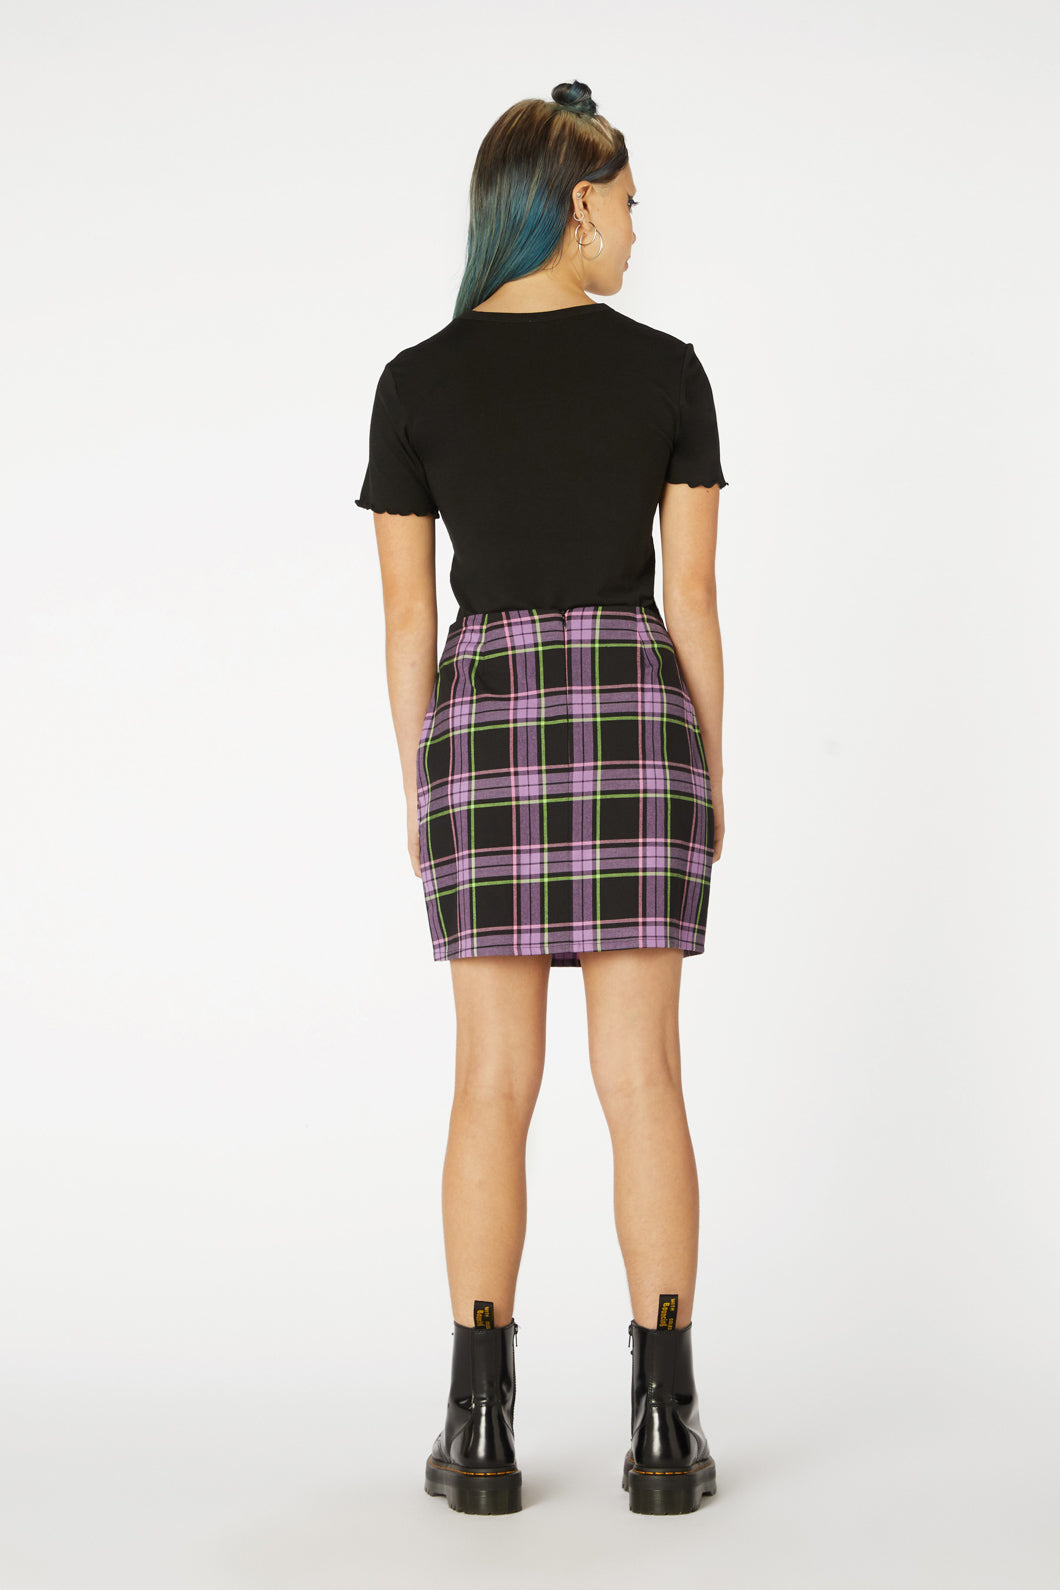 Checked Skirts  Buy Checked Skirts Online Starting at Just 175  Meesho